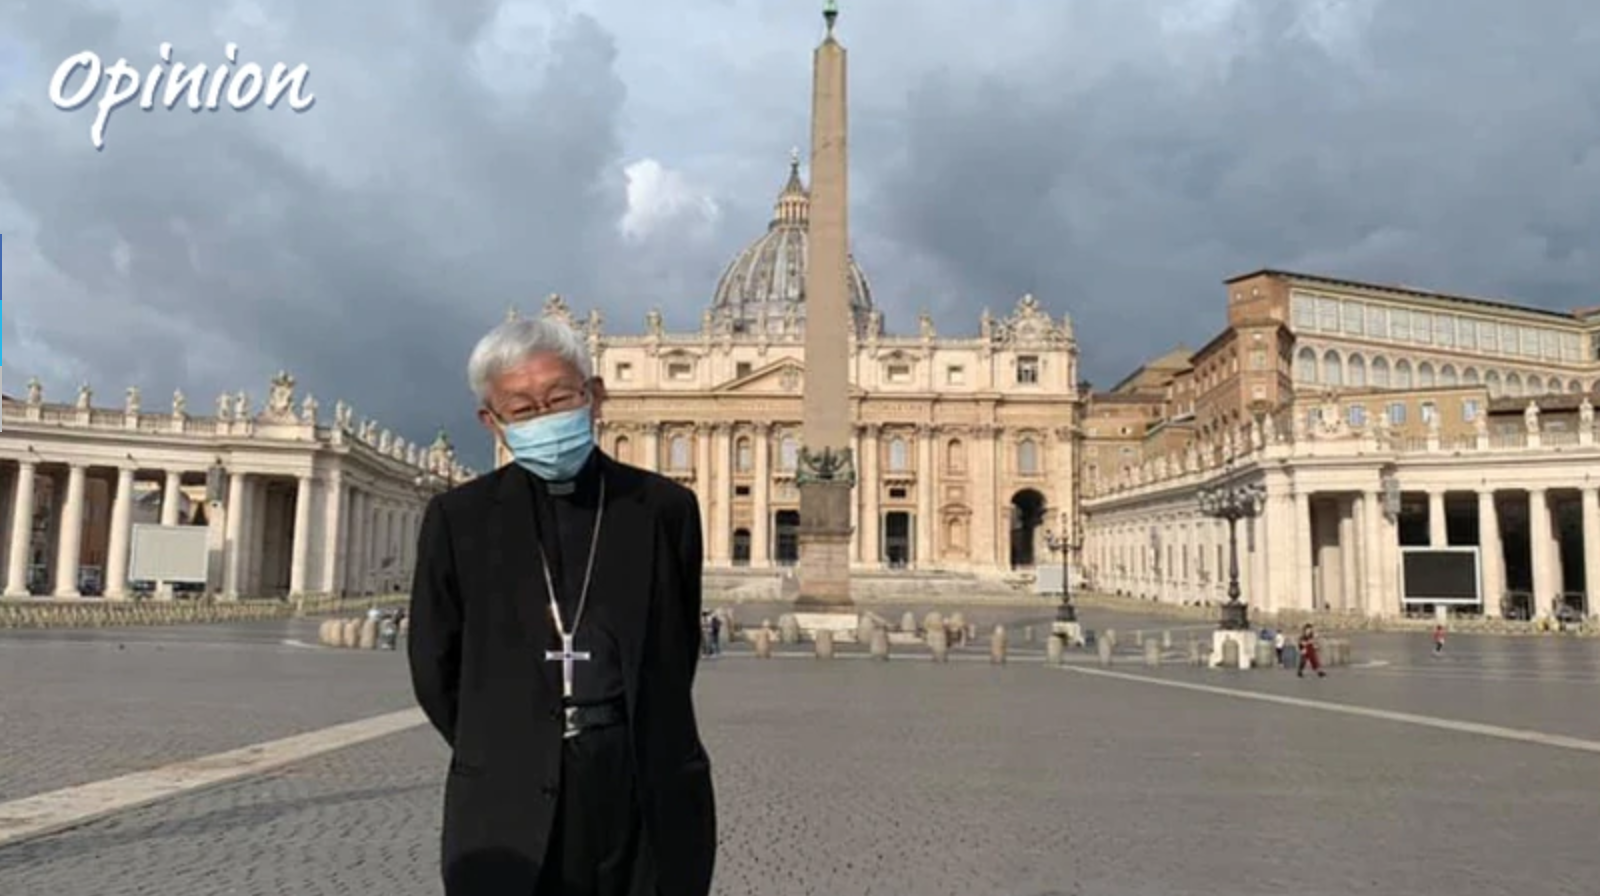 Cardinal Zen’s message received loud and clear within Italian parliament